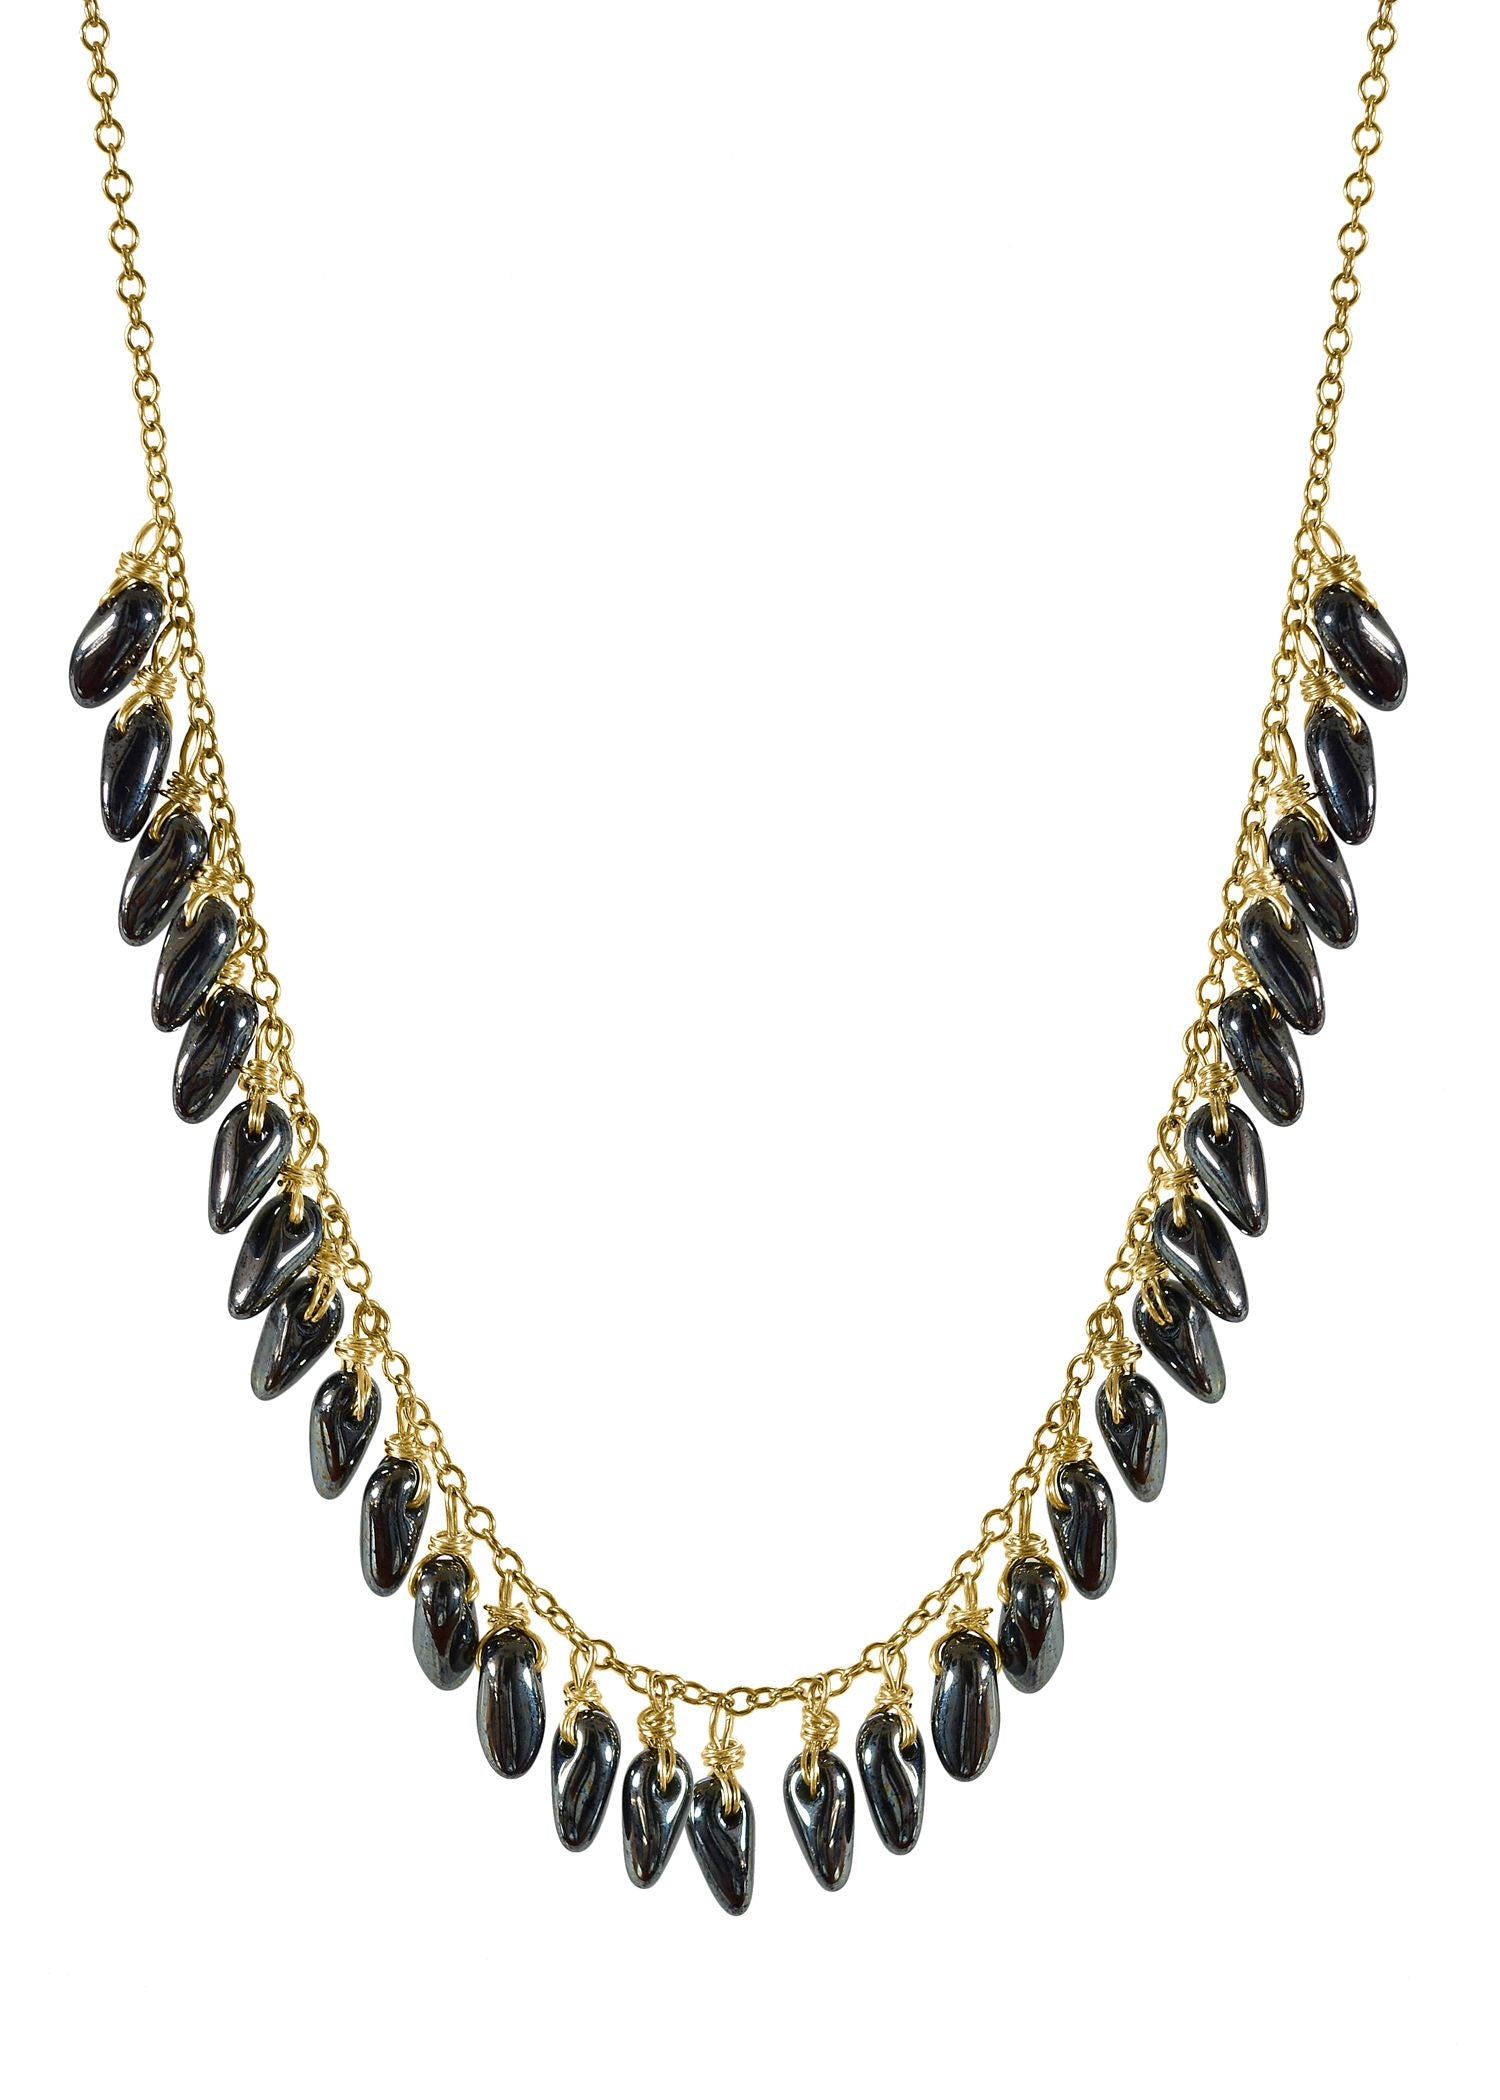 14k gold fill Hematite glass beads Necklace measures 18" in length Pendants measure 3/16" in length Handmade in our Los Angeles studio